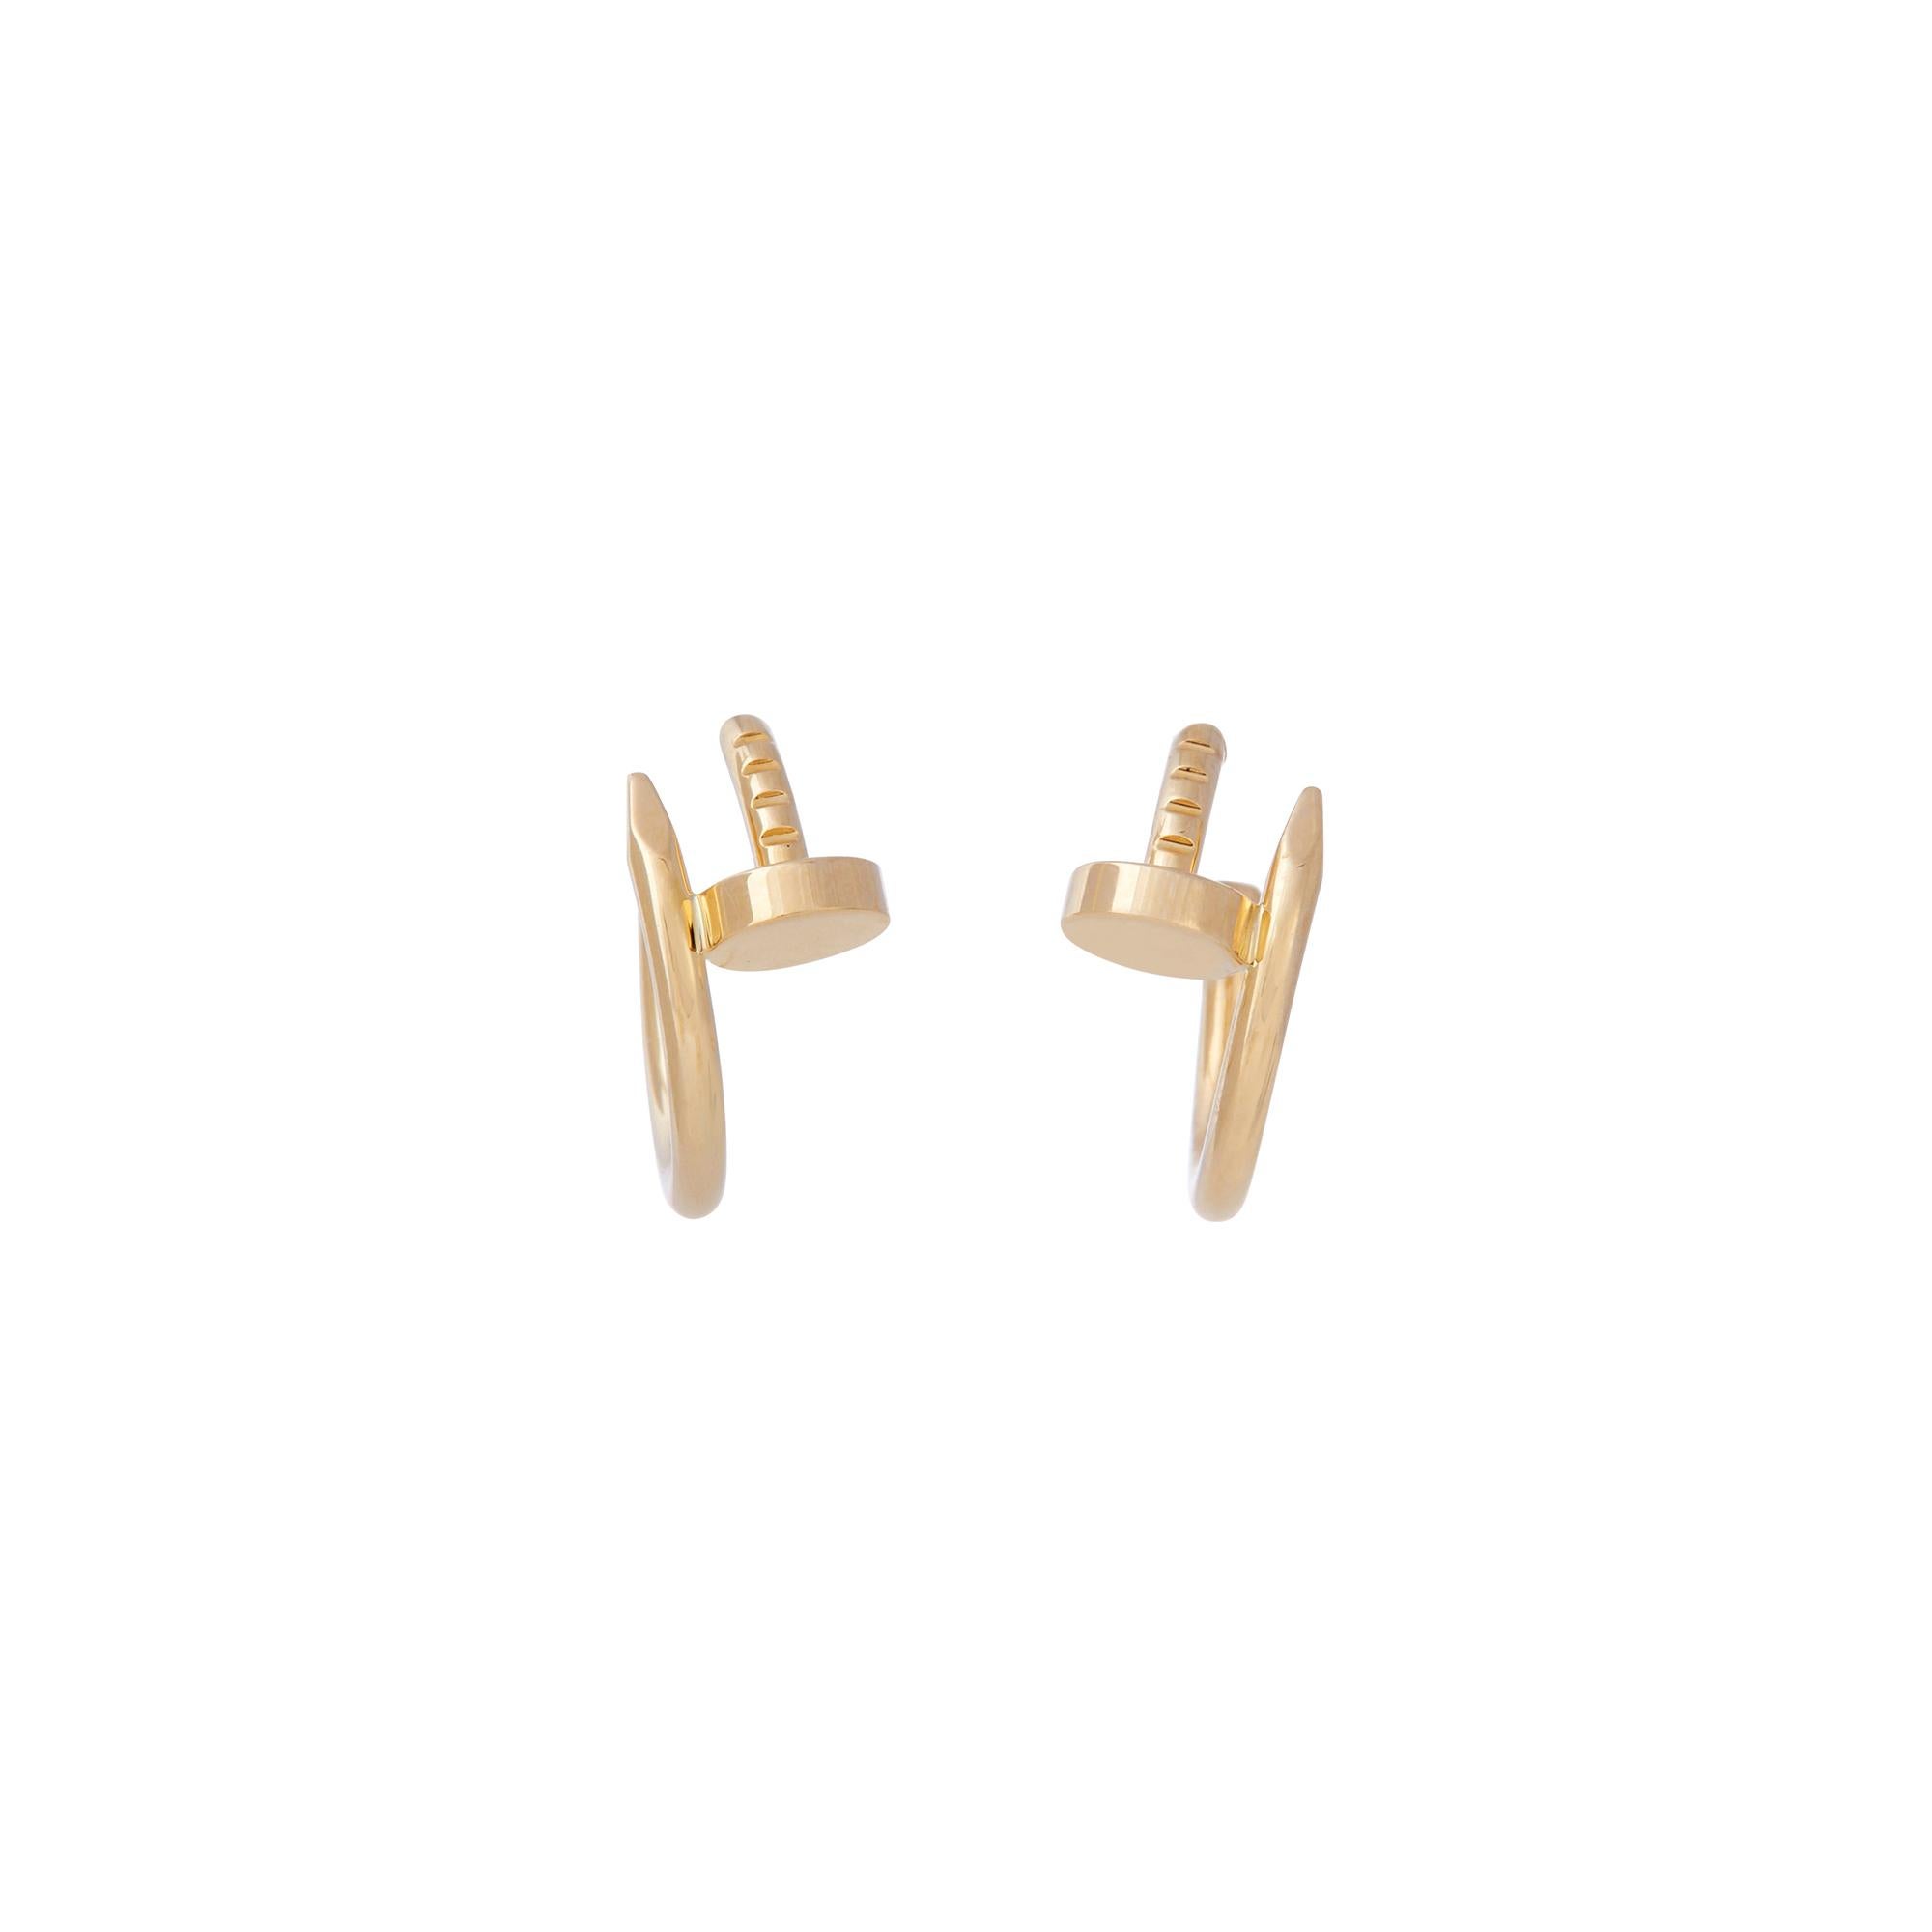 Authentic Cartier Juste un Clou earrings crafted in 18 karat yellow gold features the iconic Cartier nail motif taking the shape of small hoops.  The earrings measure .64 inches in length and 1.8mm wide.  Signed Cartier, Au750, with serial number